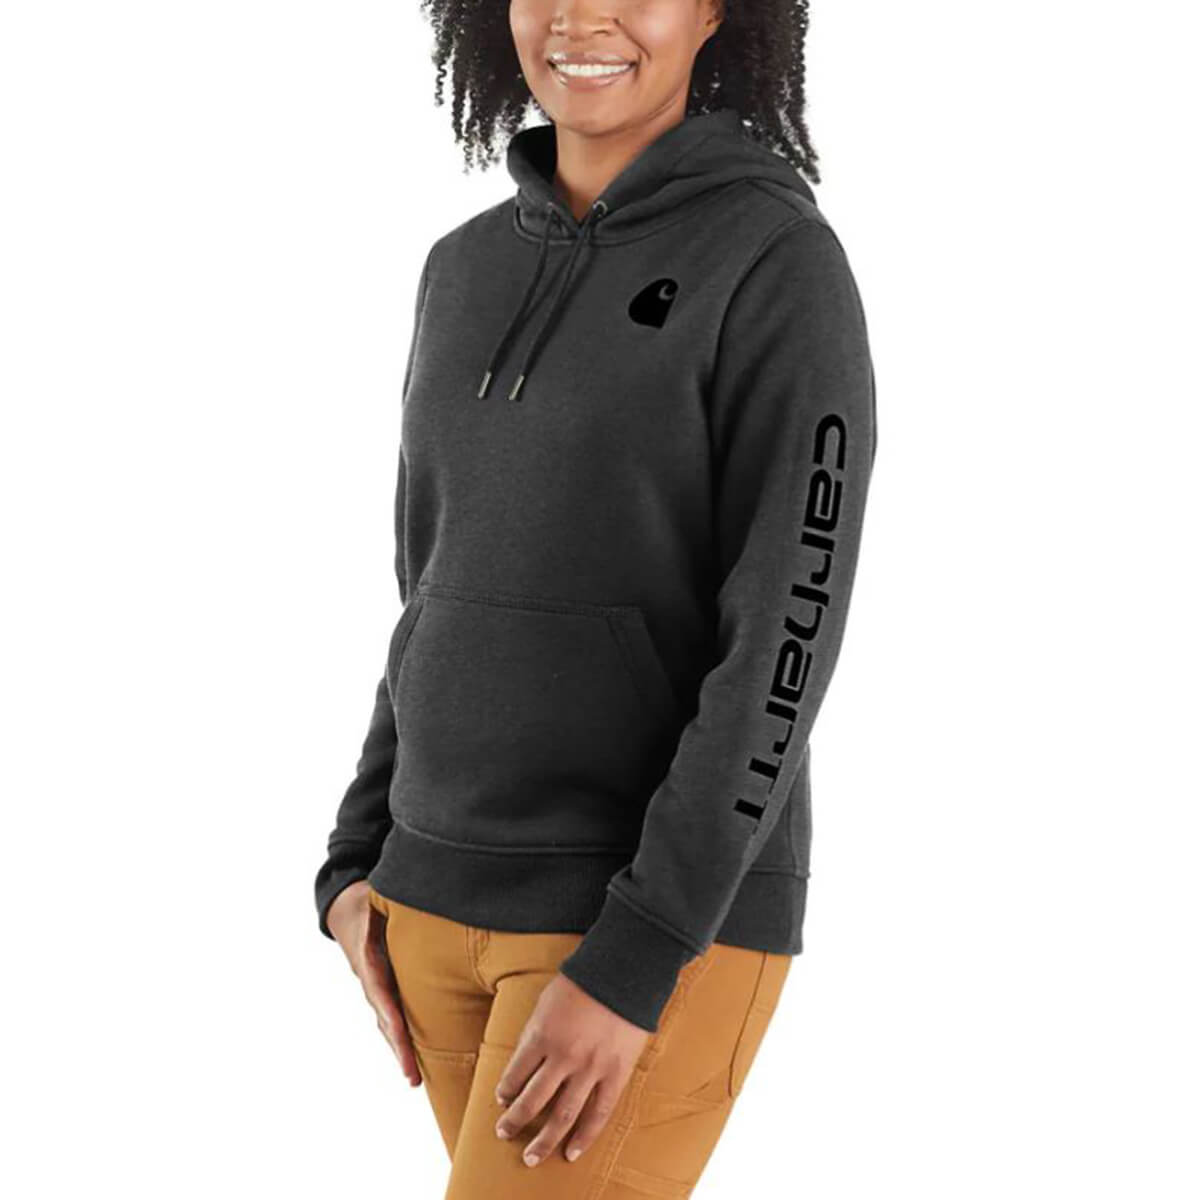 Carhartt Ladies Relaxed Fit Graphic Sweatshirt - Carbon